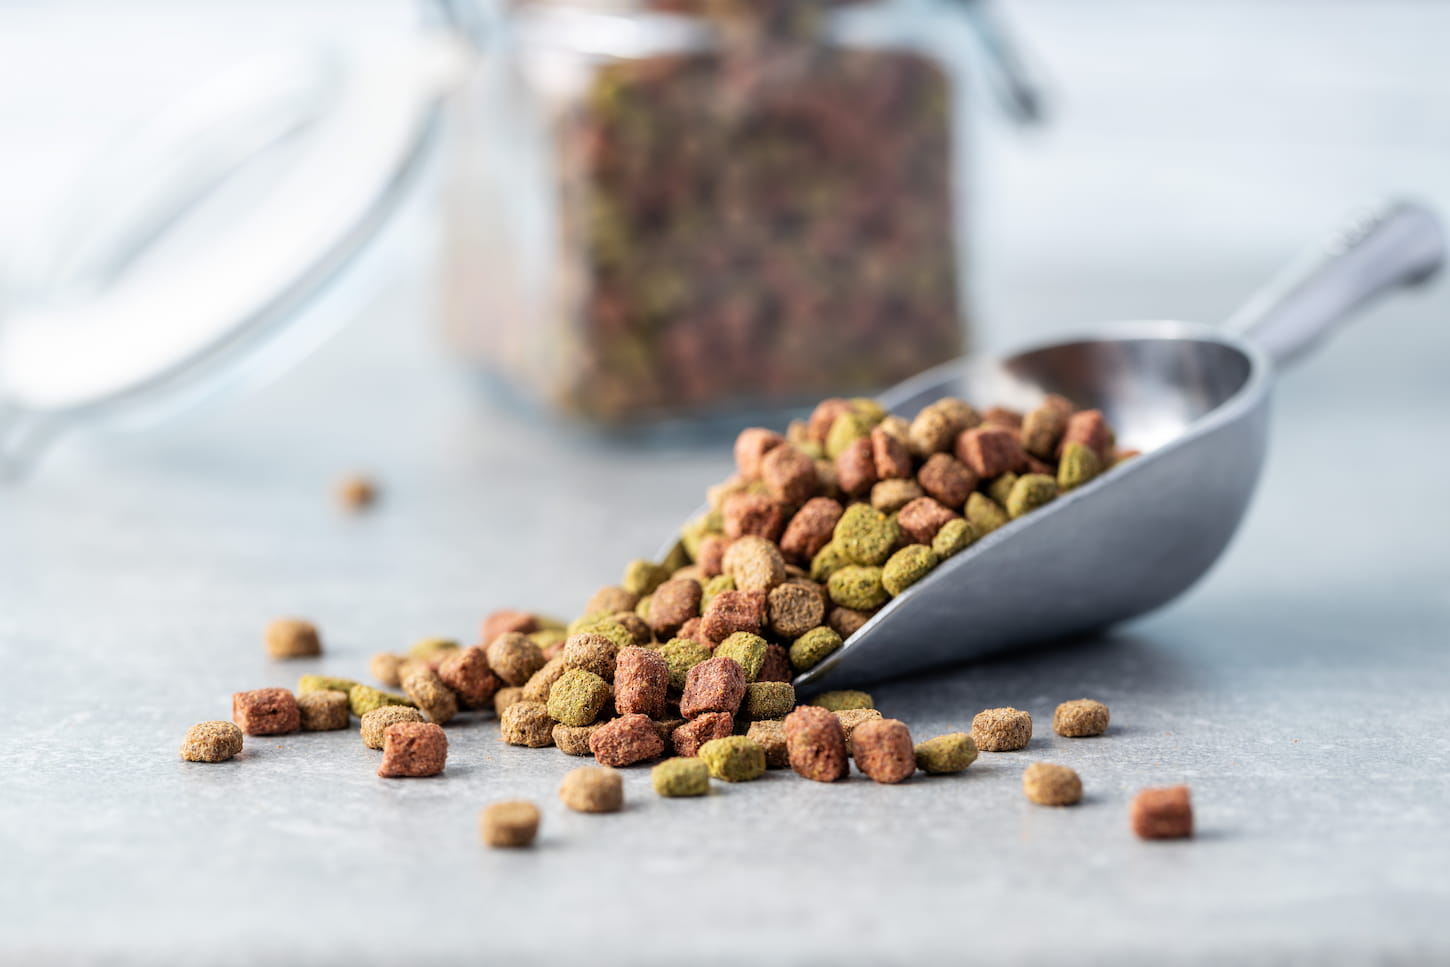 Should You Freeze Dry Dog Food? Pros, Cons, and Tips